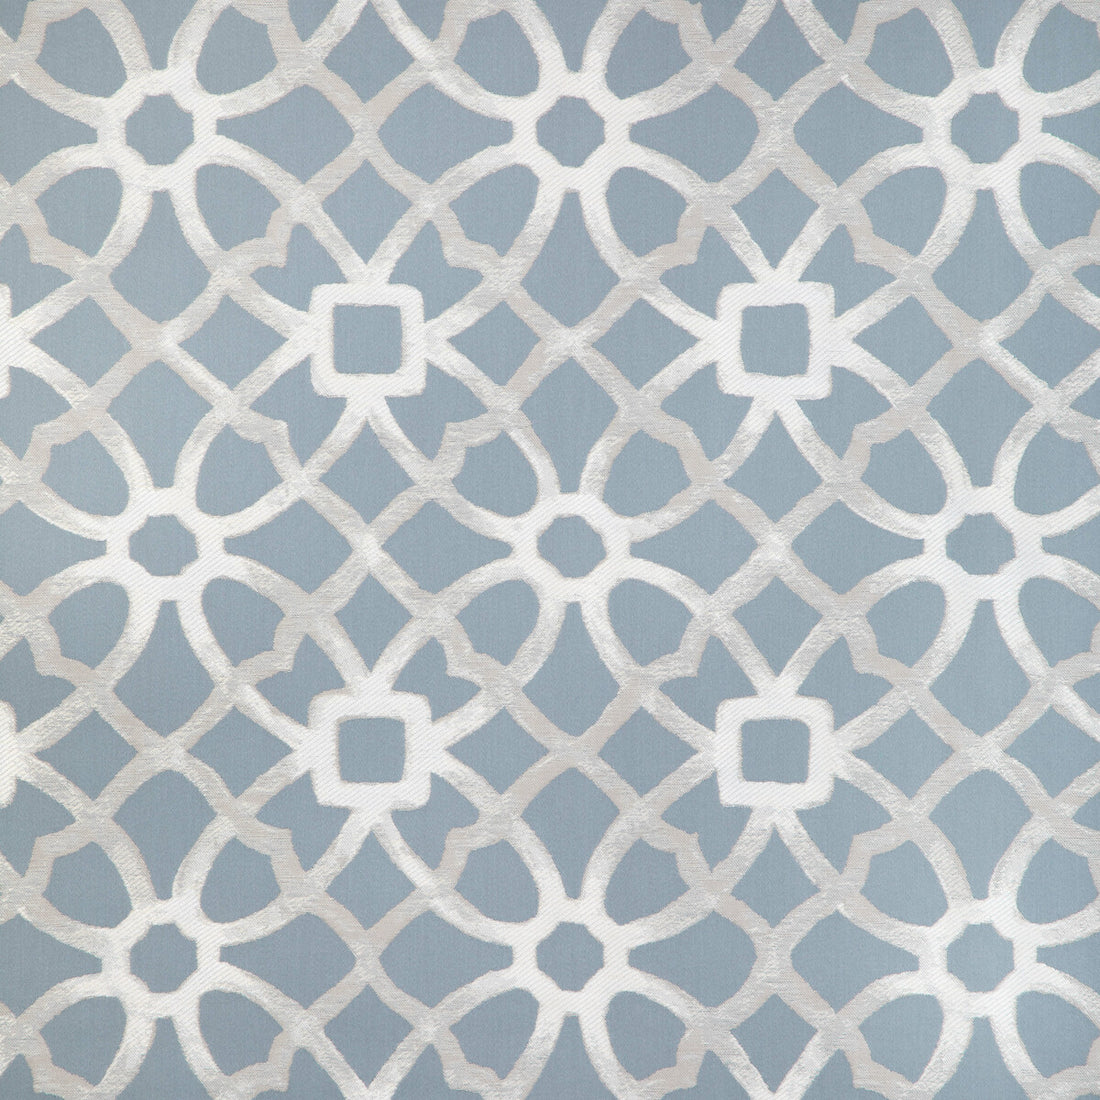 New Zuma fabric in vapor color - pattern 36788.505.0 - by Kravet Design in the Candice Olson collection